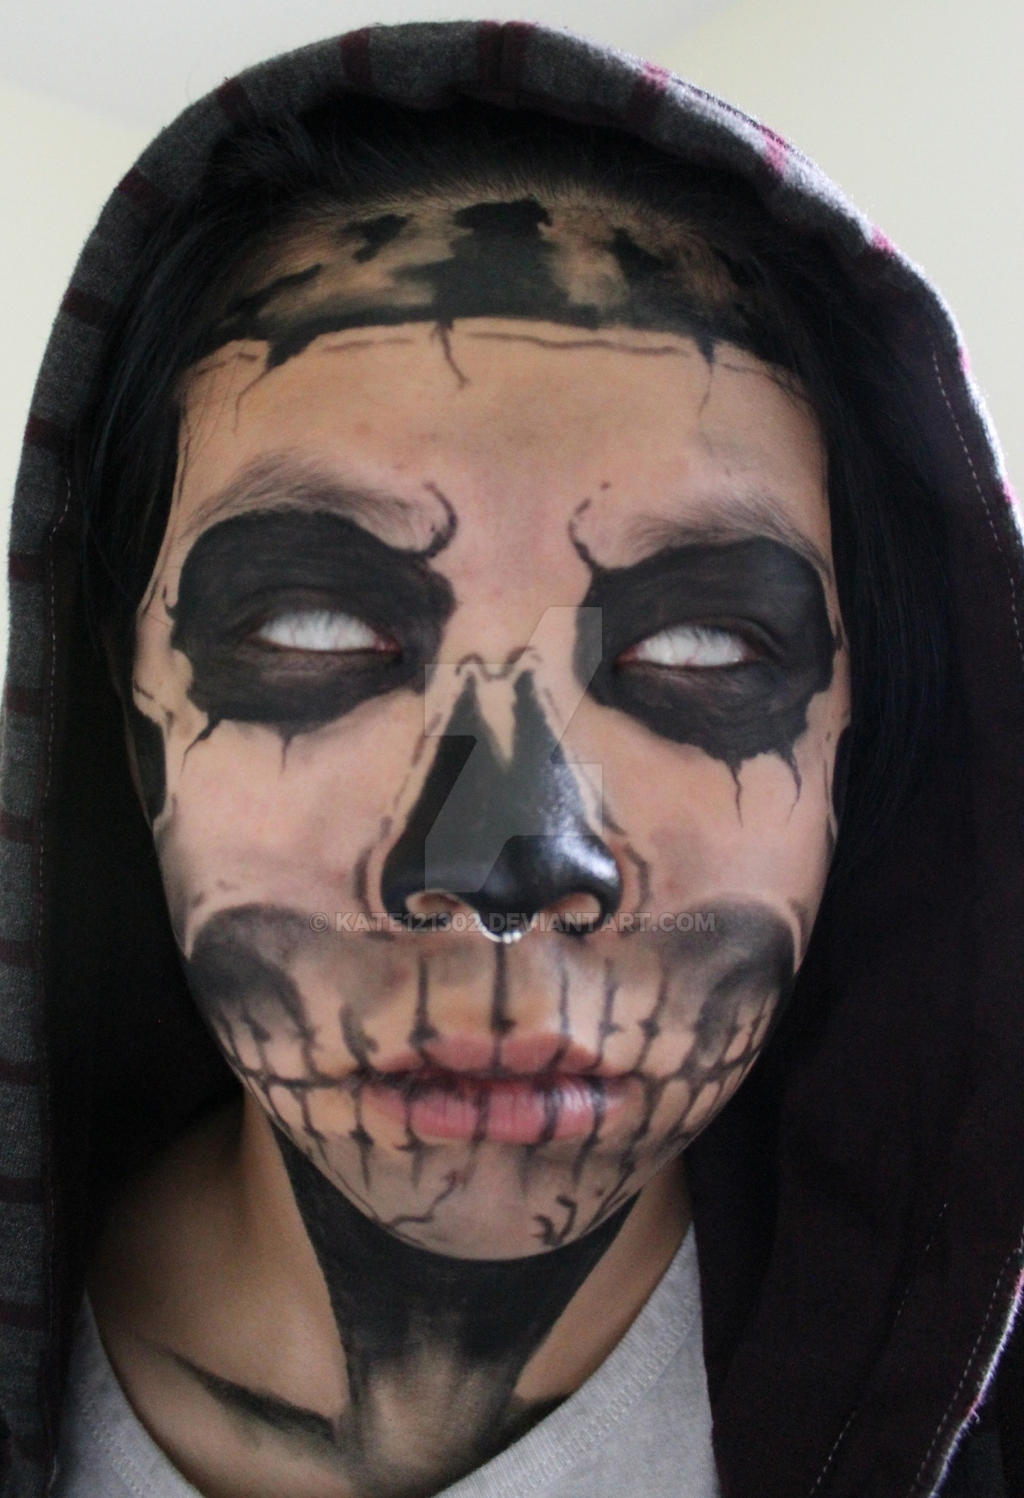 Zombie boy makeup 2 by kate121302 on